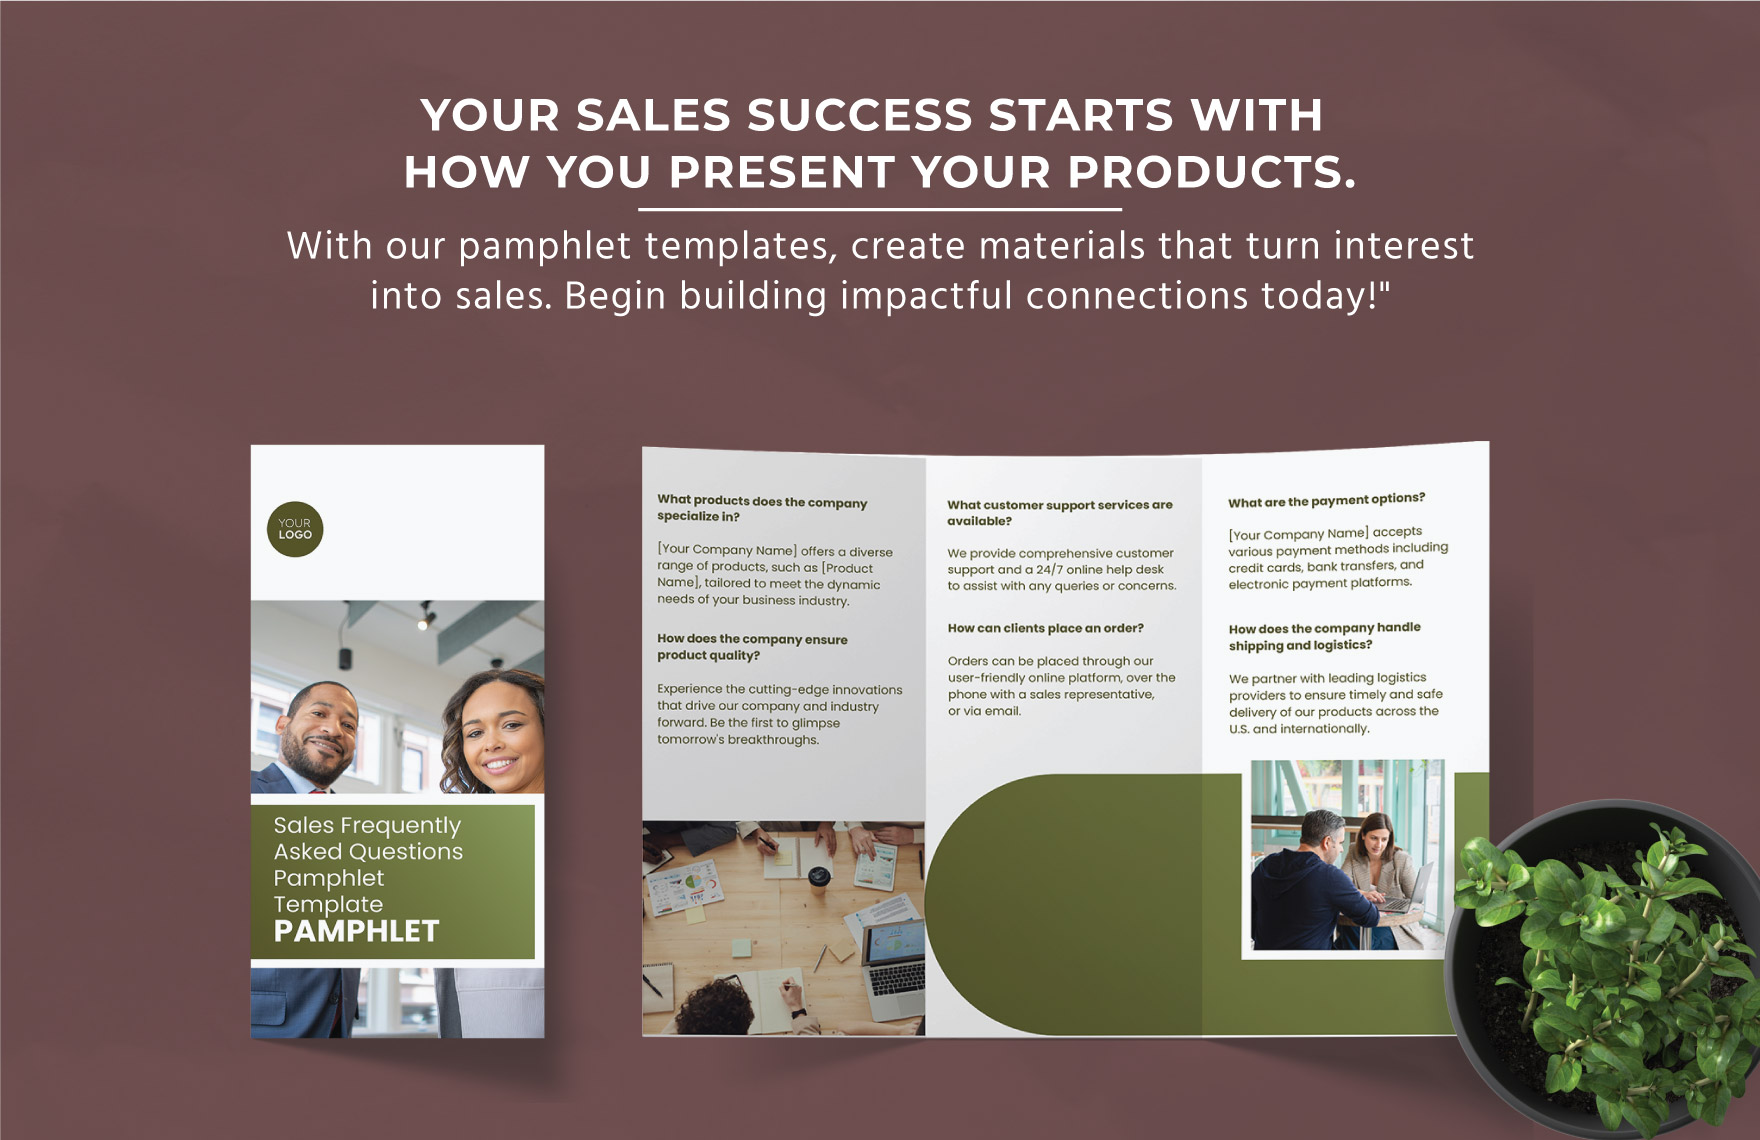 Sales Frequently Asked Questions Pamphlet Template